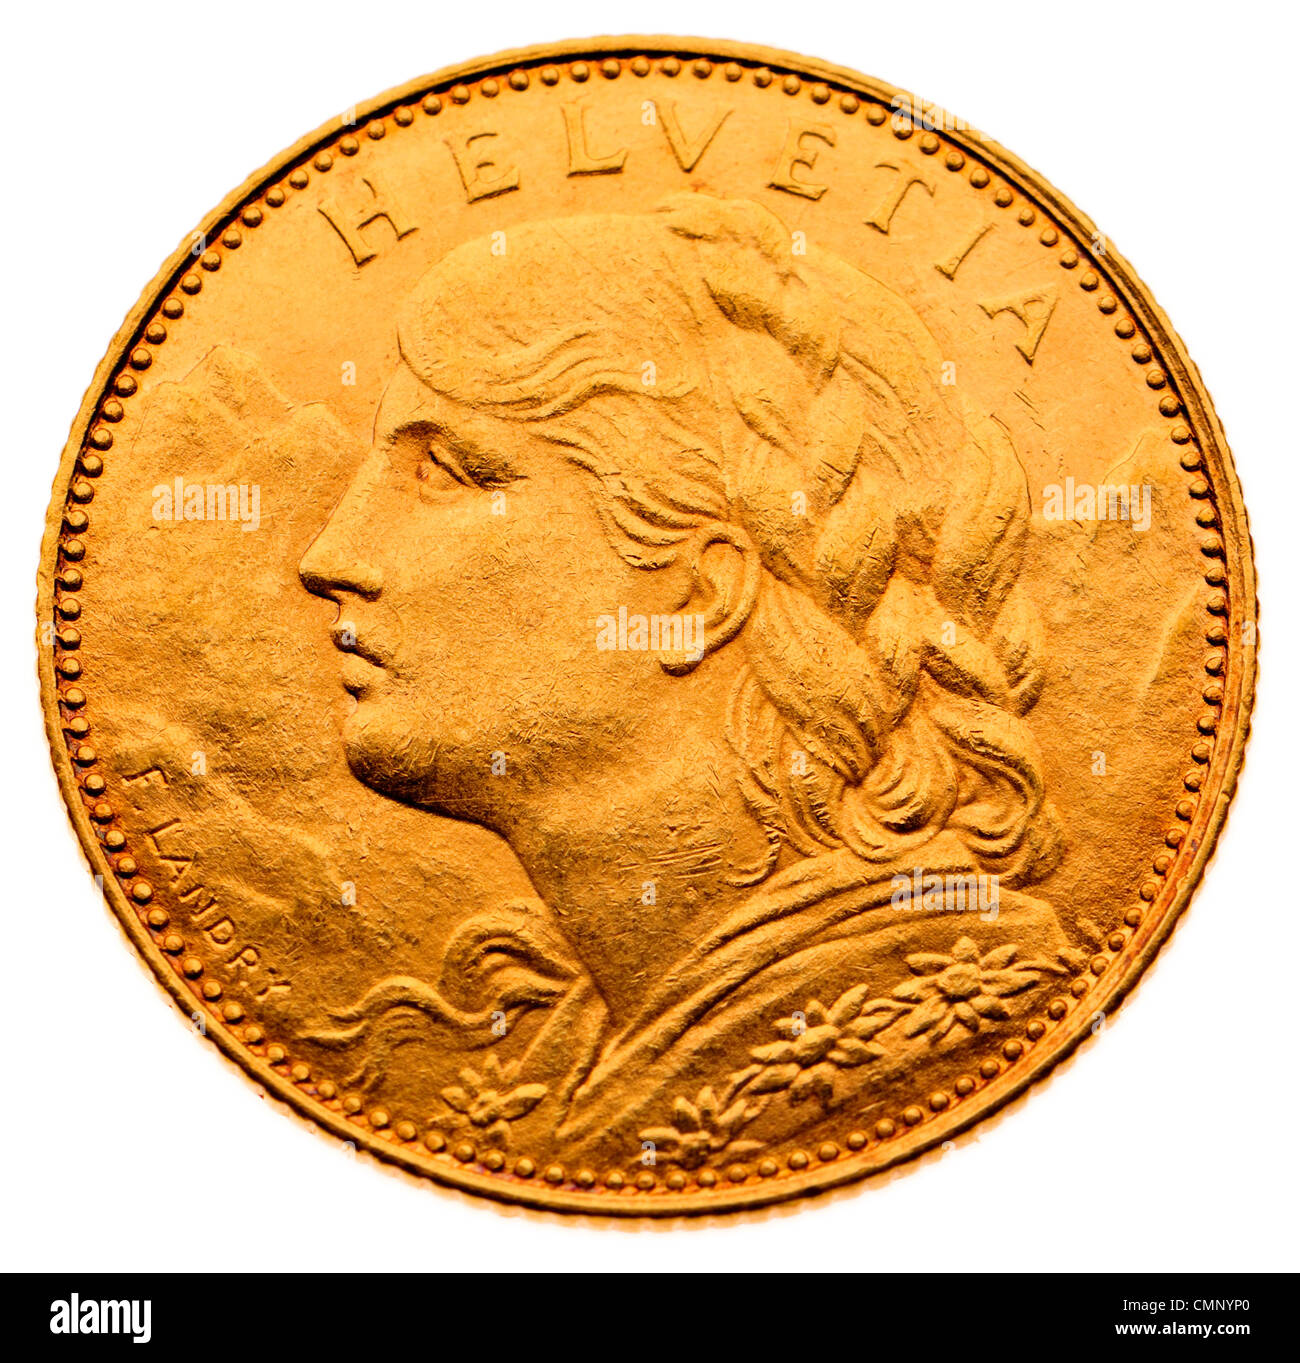 Gold Coin - Swiss 10 francs, 1914 Stock Photo - Alamy